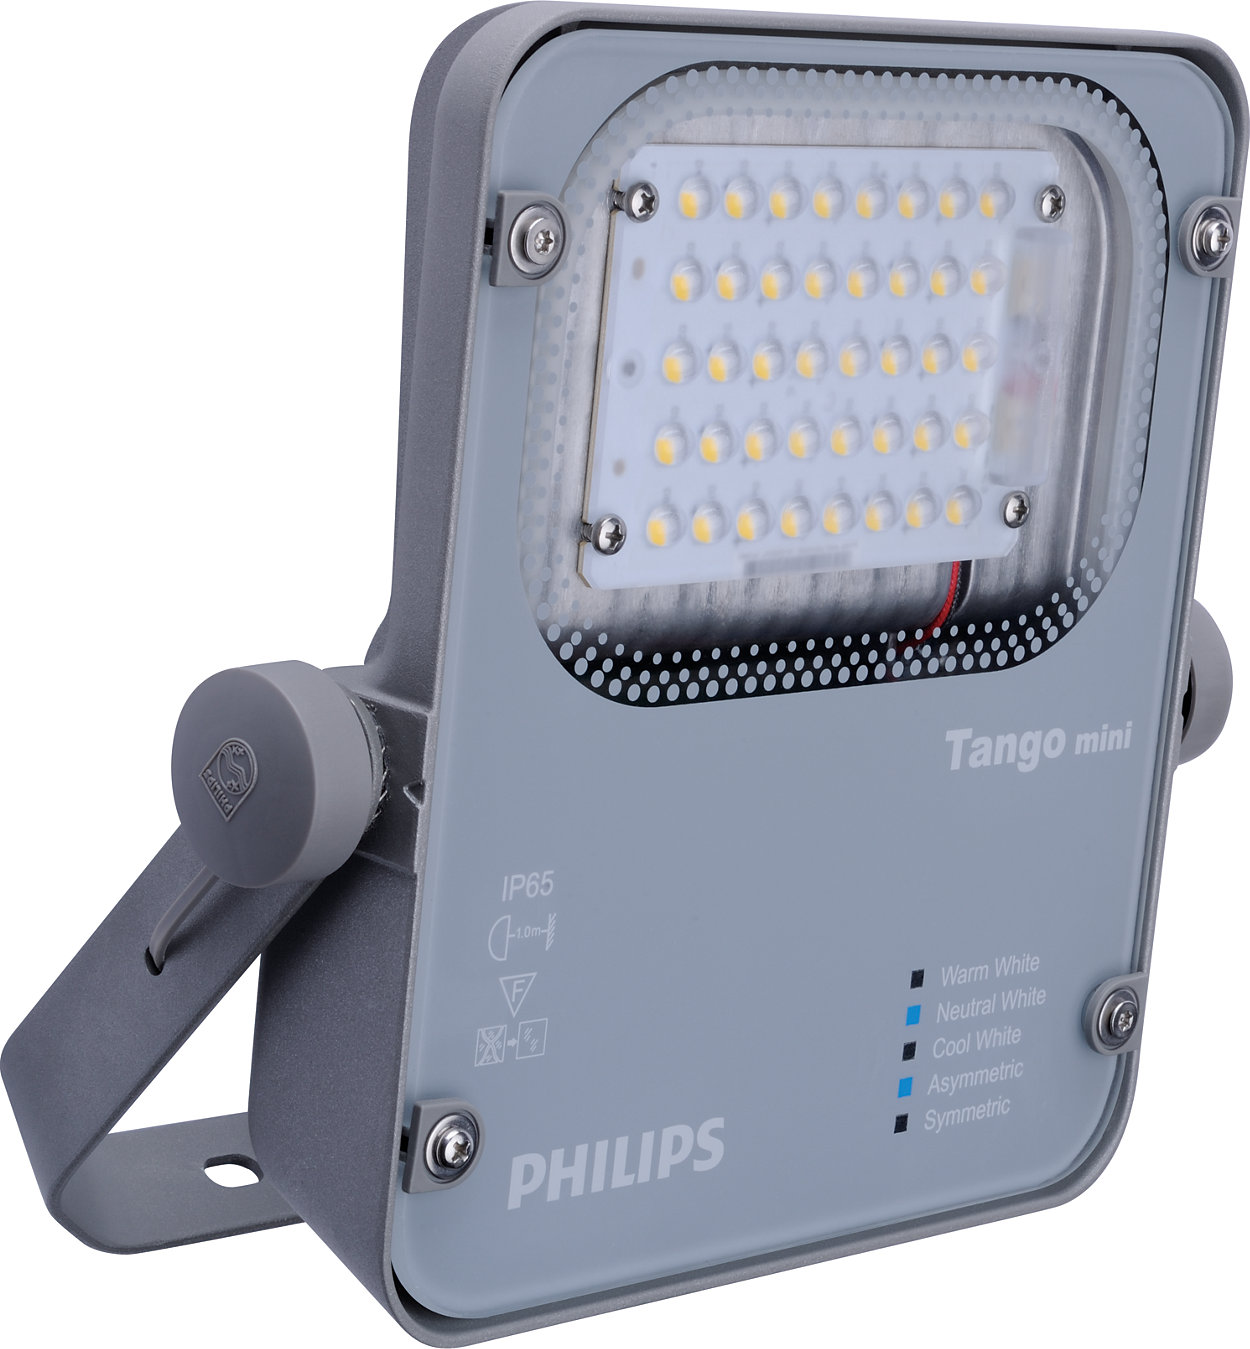 High performance floodlight in compact size